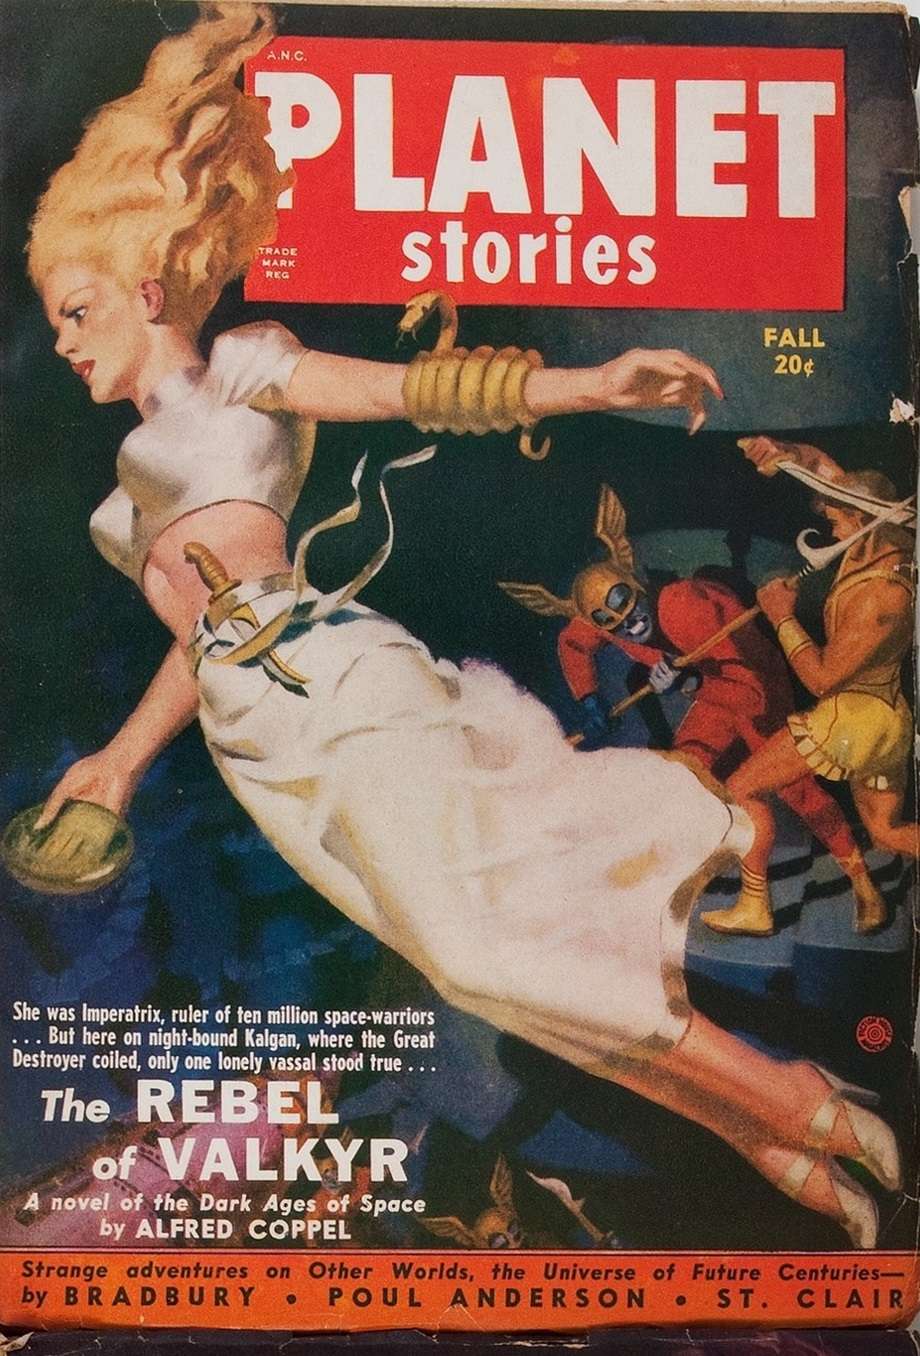 Book Cover For Planet Stories v4 8 - The Rebel of Valkyr - Alfred Coppel, Jr.